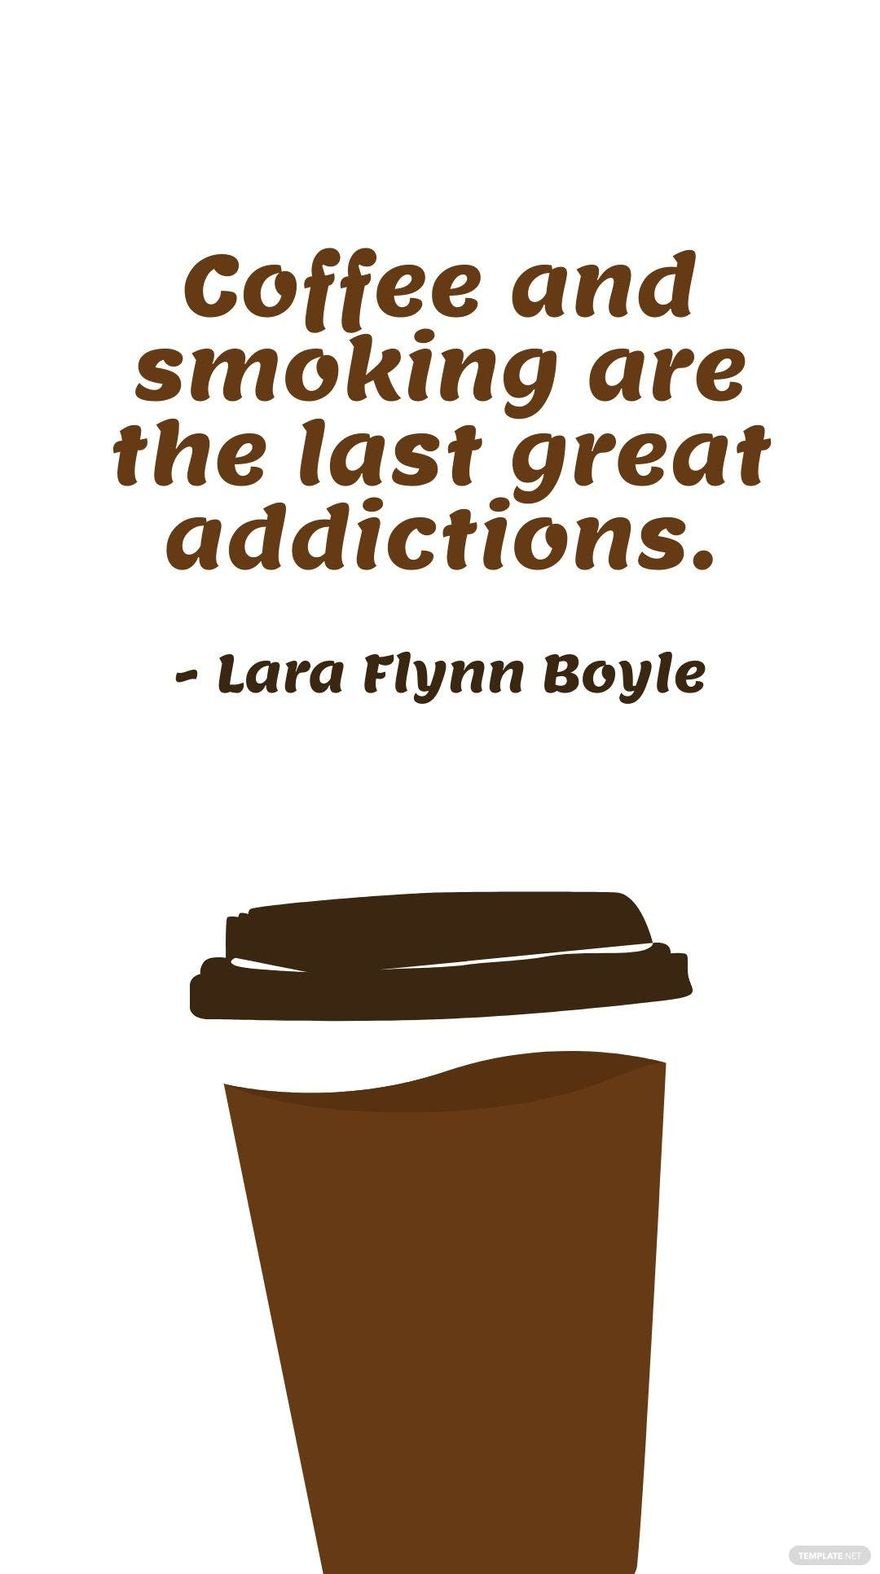 Free Lara Flynn Boyle - Coffee and smoking are the last great addictions. in JPG